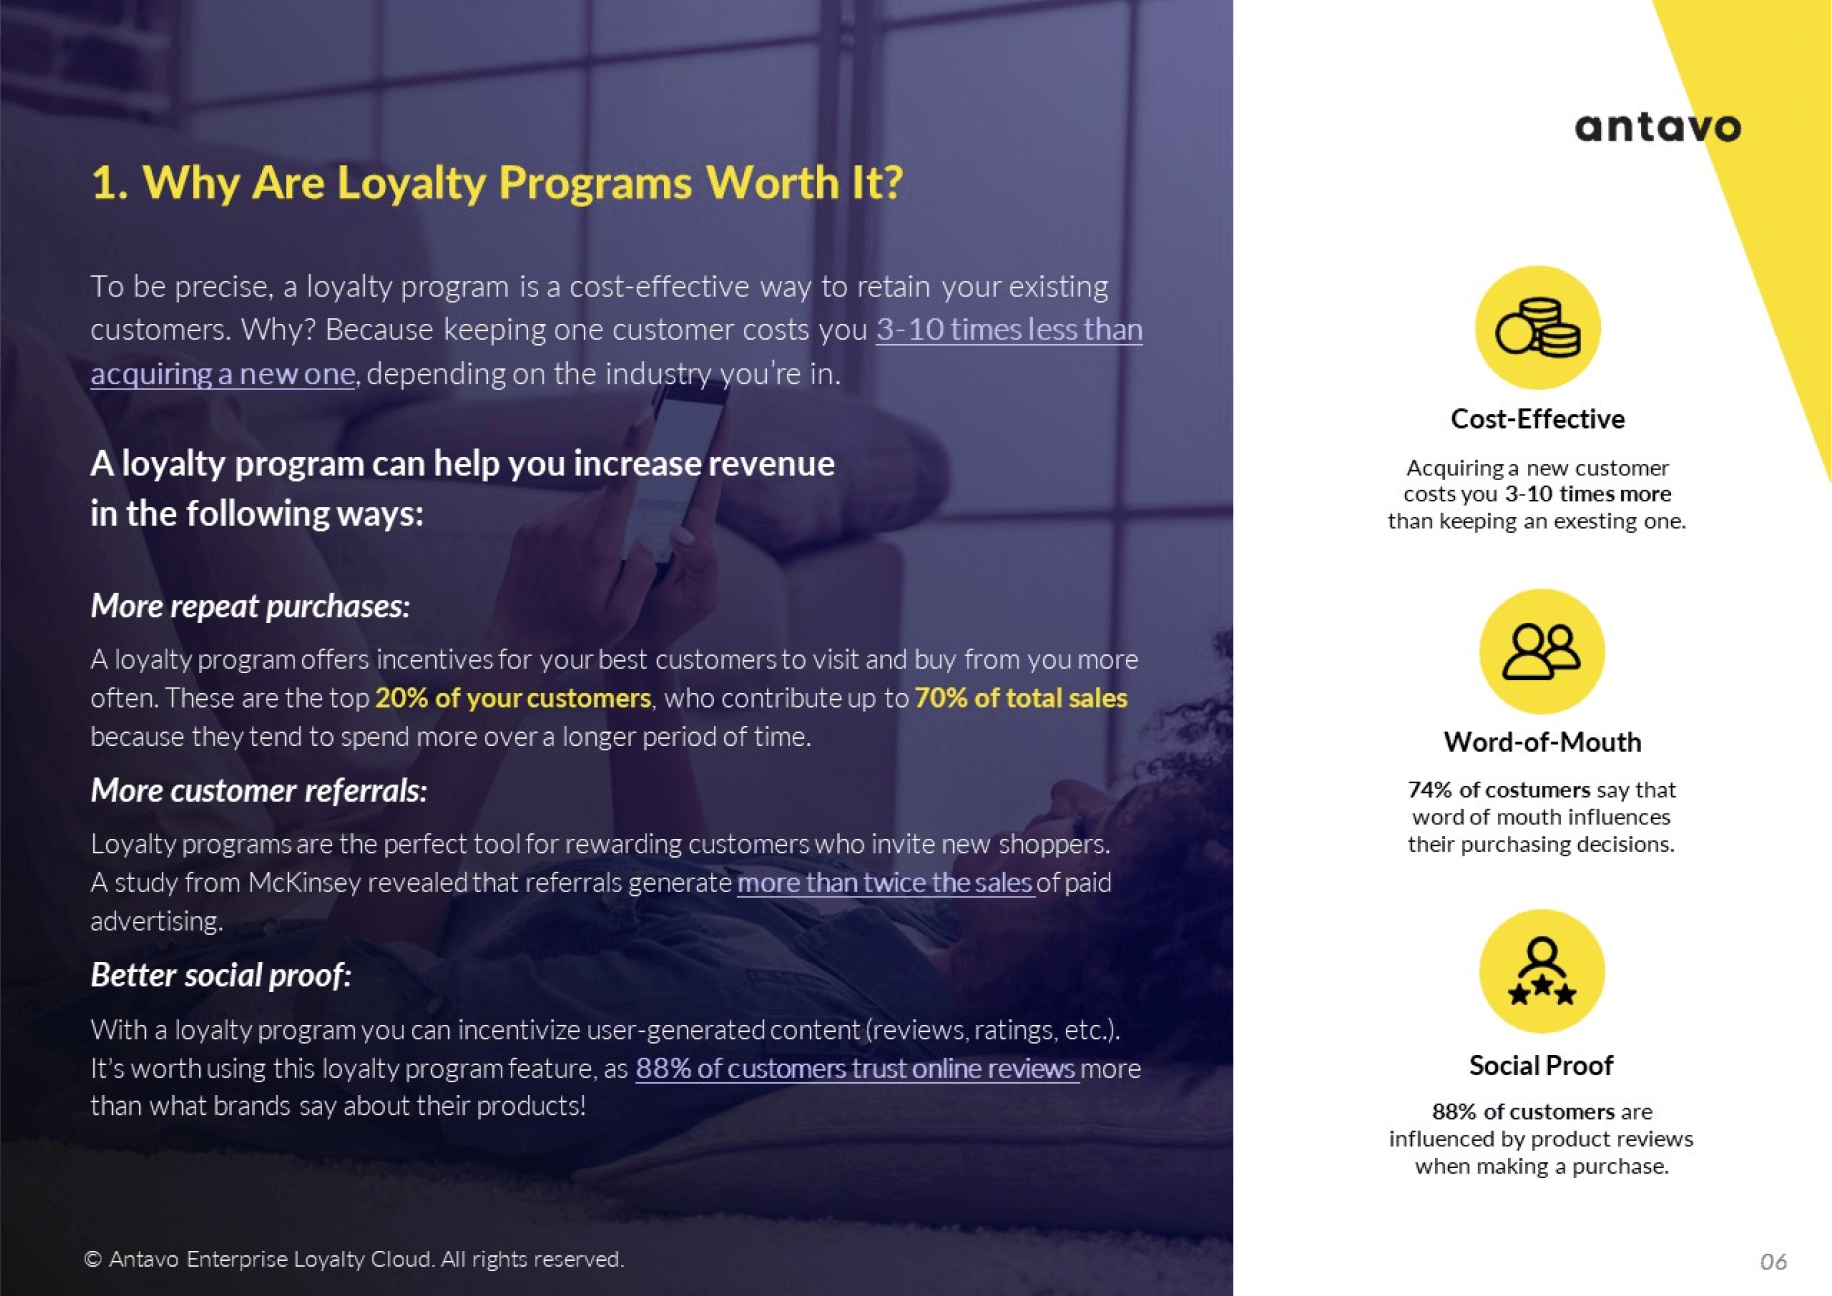 Antavo's Ebook: The Definitive Guide to Creating a Successful Loyalty Program - Why are loyalty programs worth it?